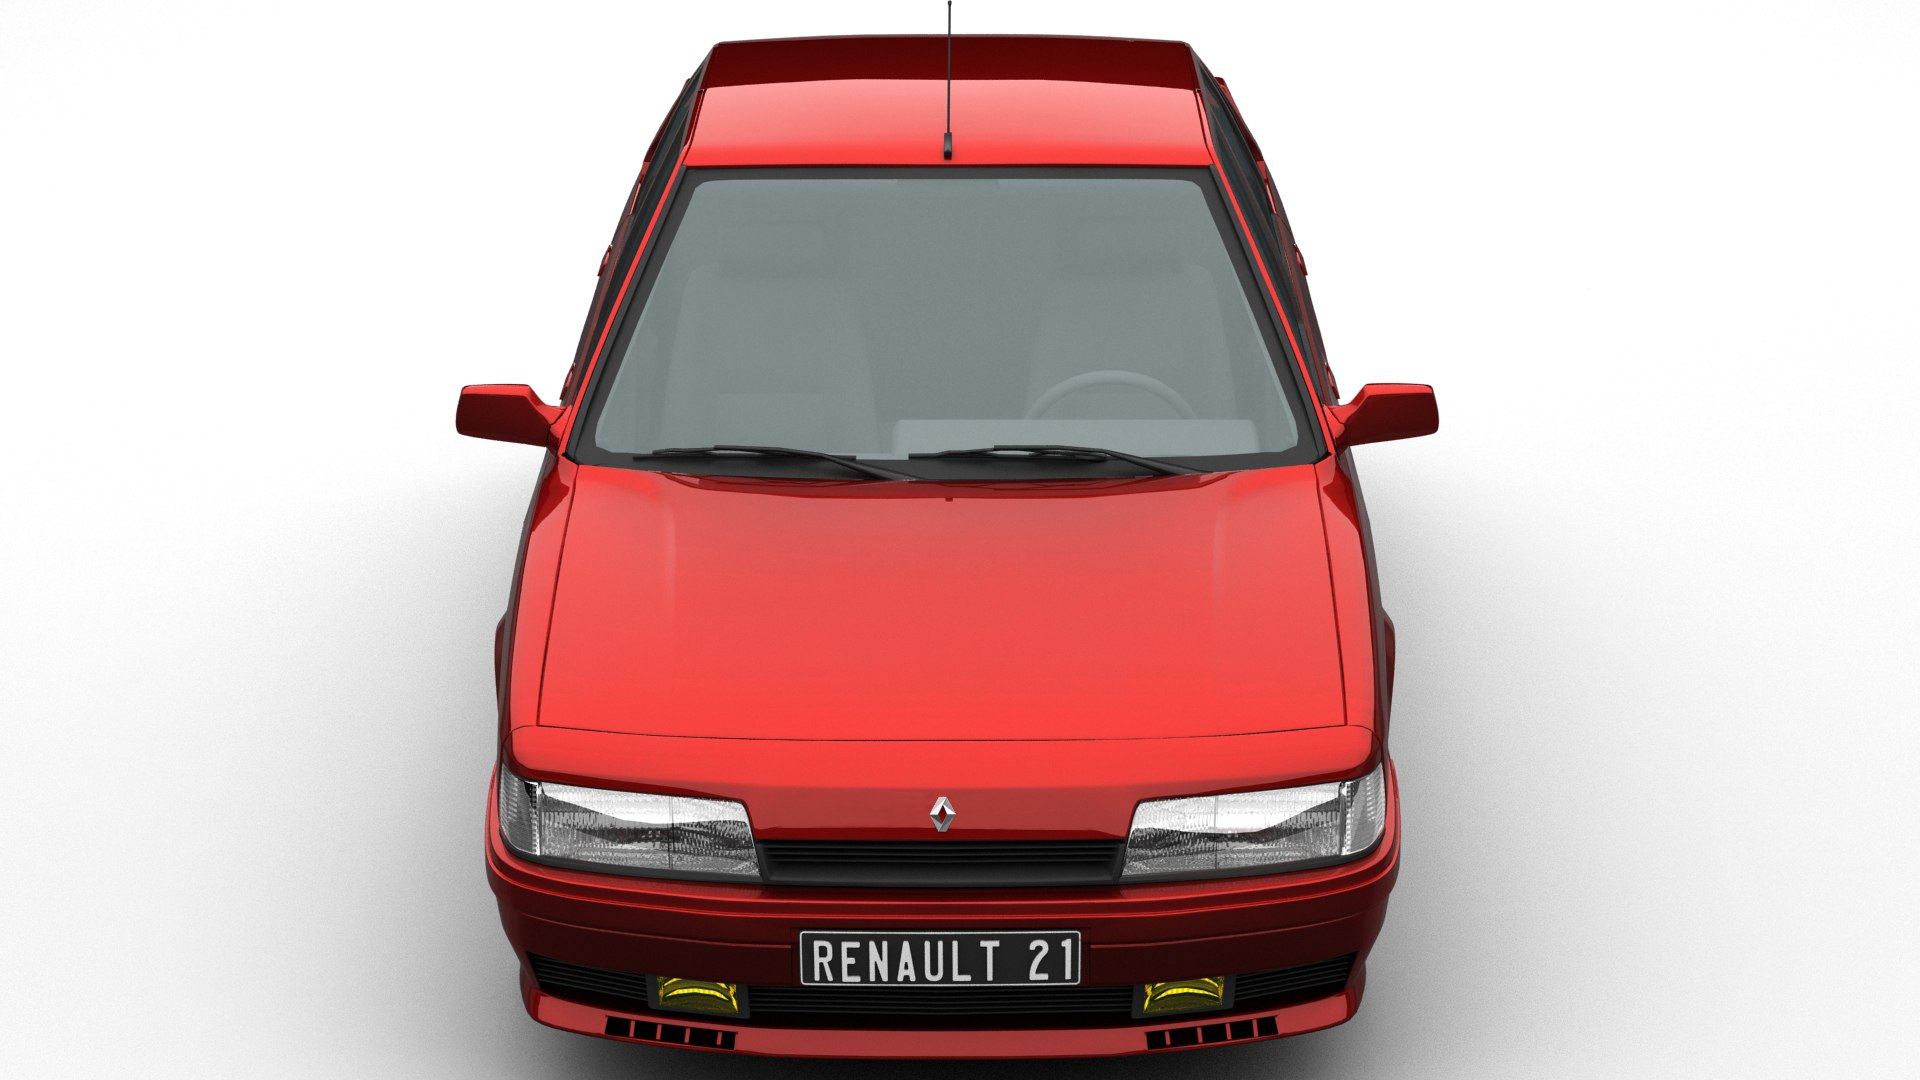 File:Renault 21 front 20080108.jpg - Wikimedia Commons